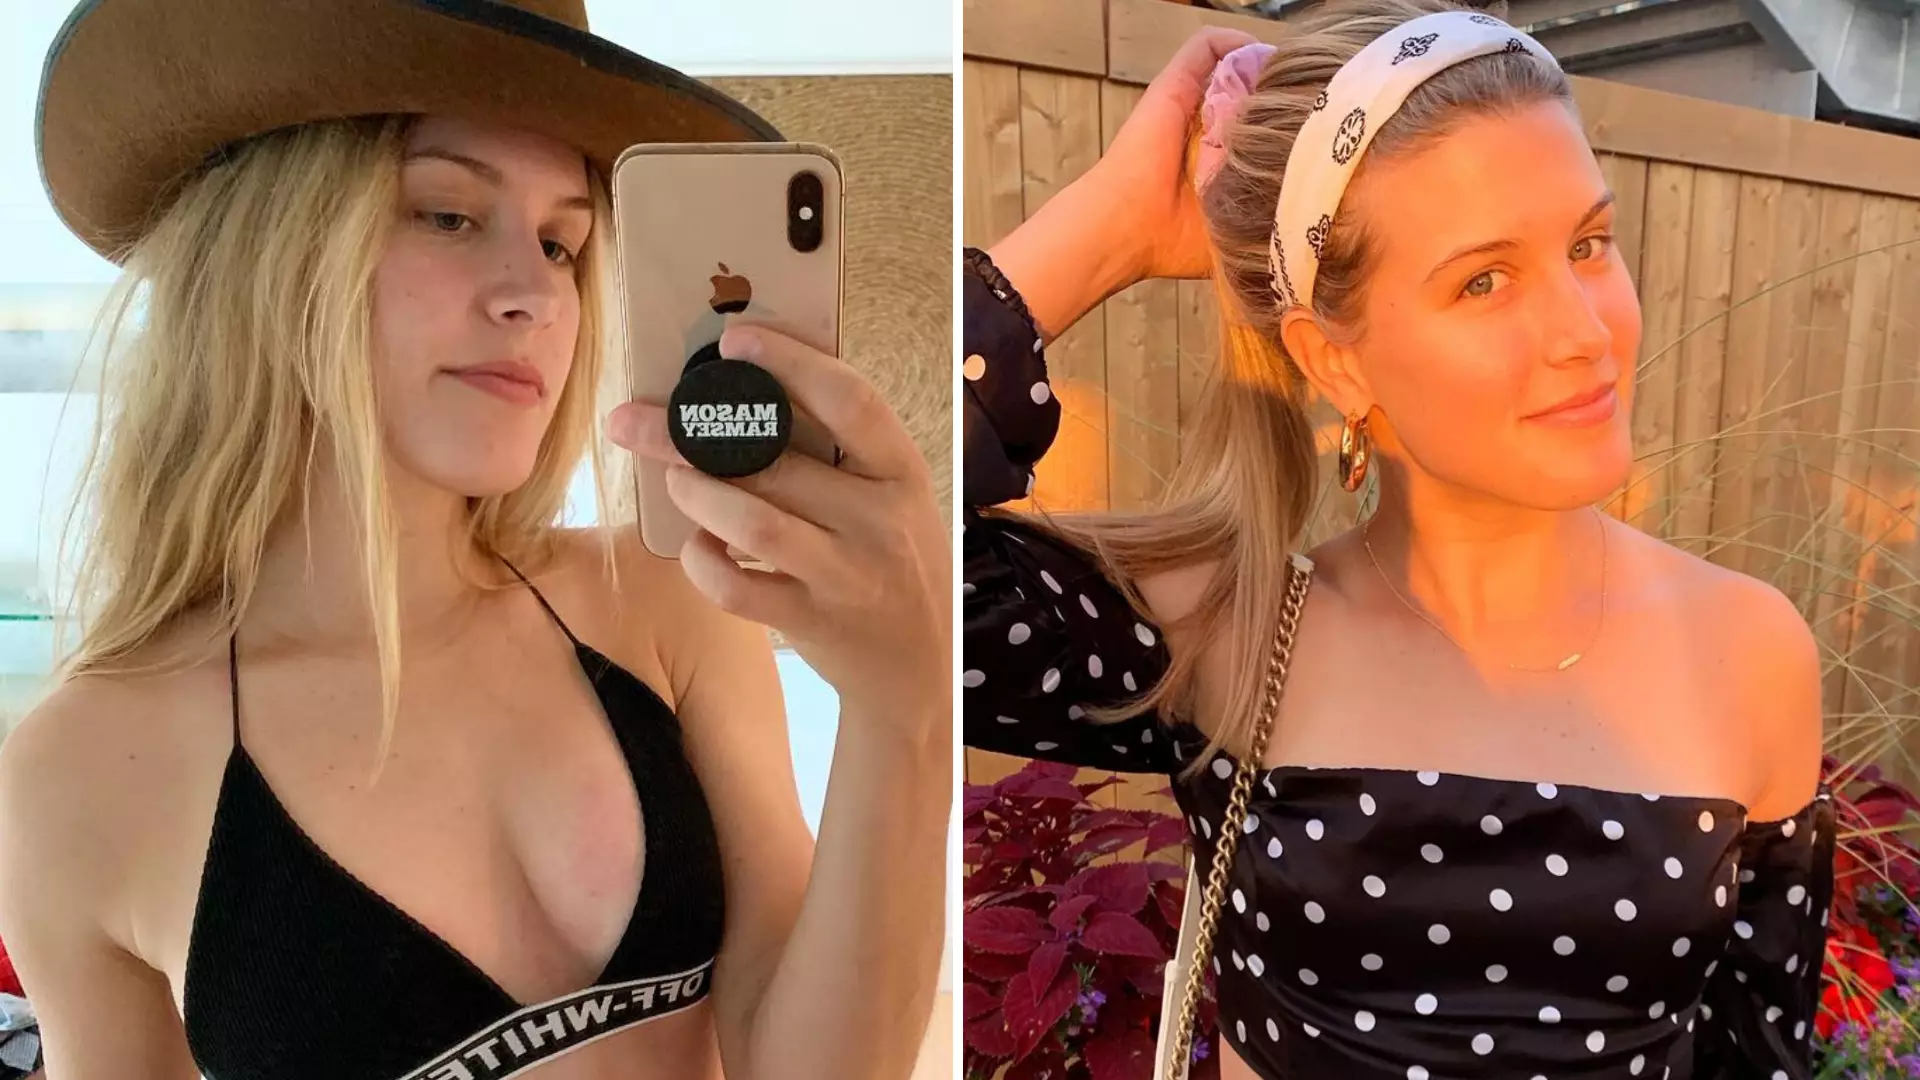 Genie Bouchard Is 'Selling A Dinner Date' And Has Already Received A Crazy Bid From A Fan